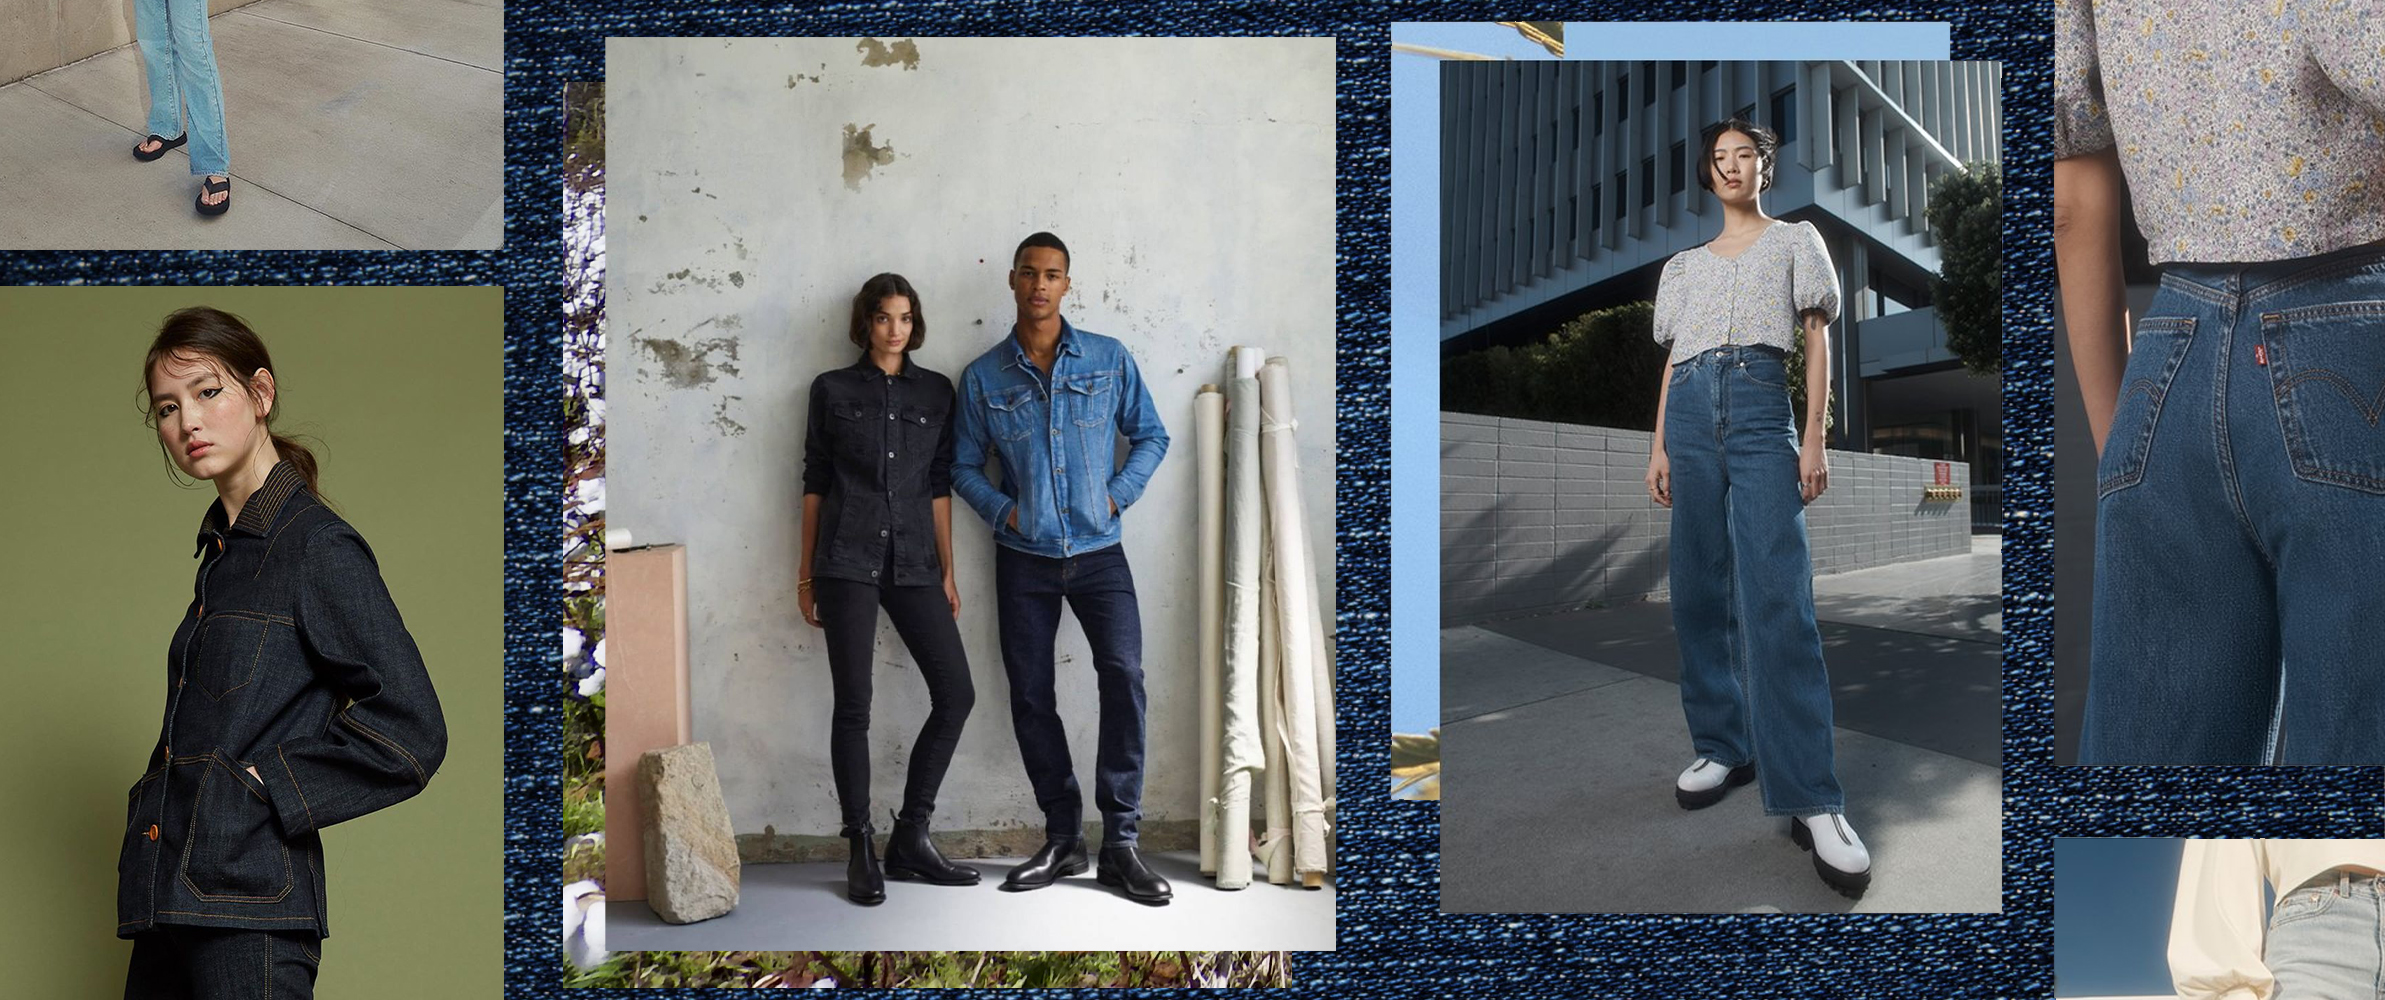 levi's sustainable jeans